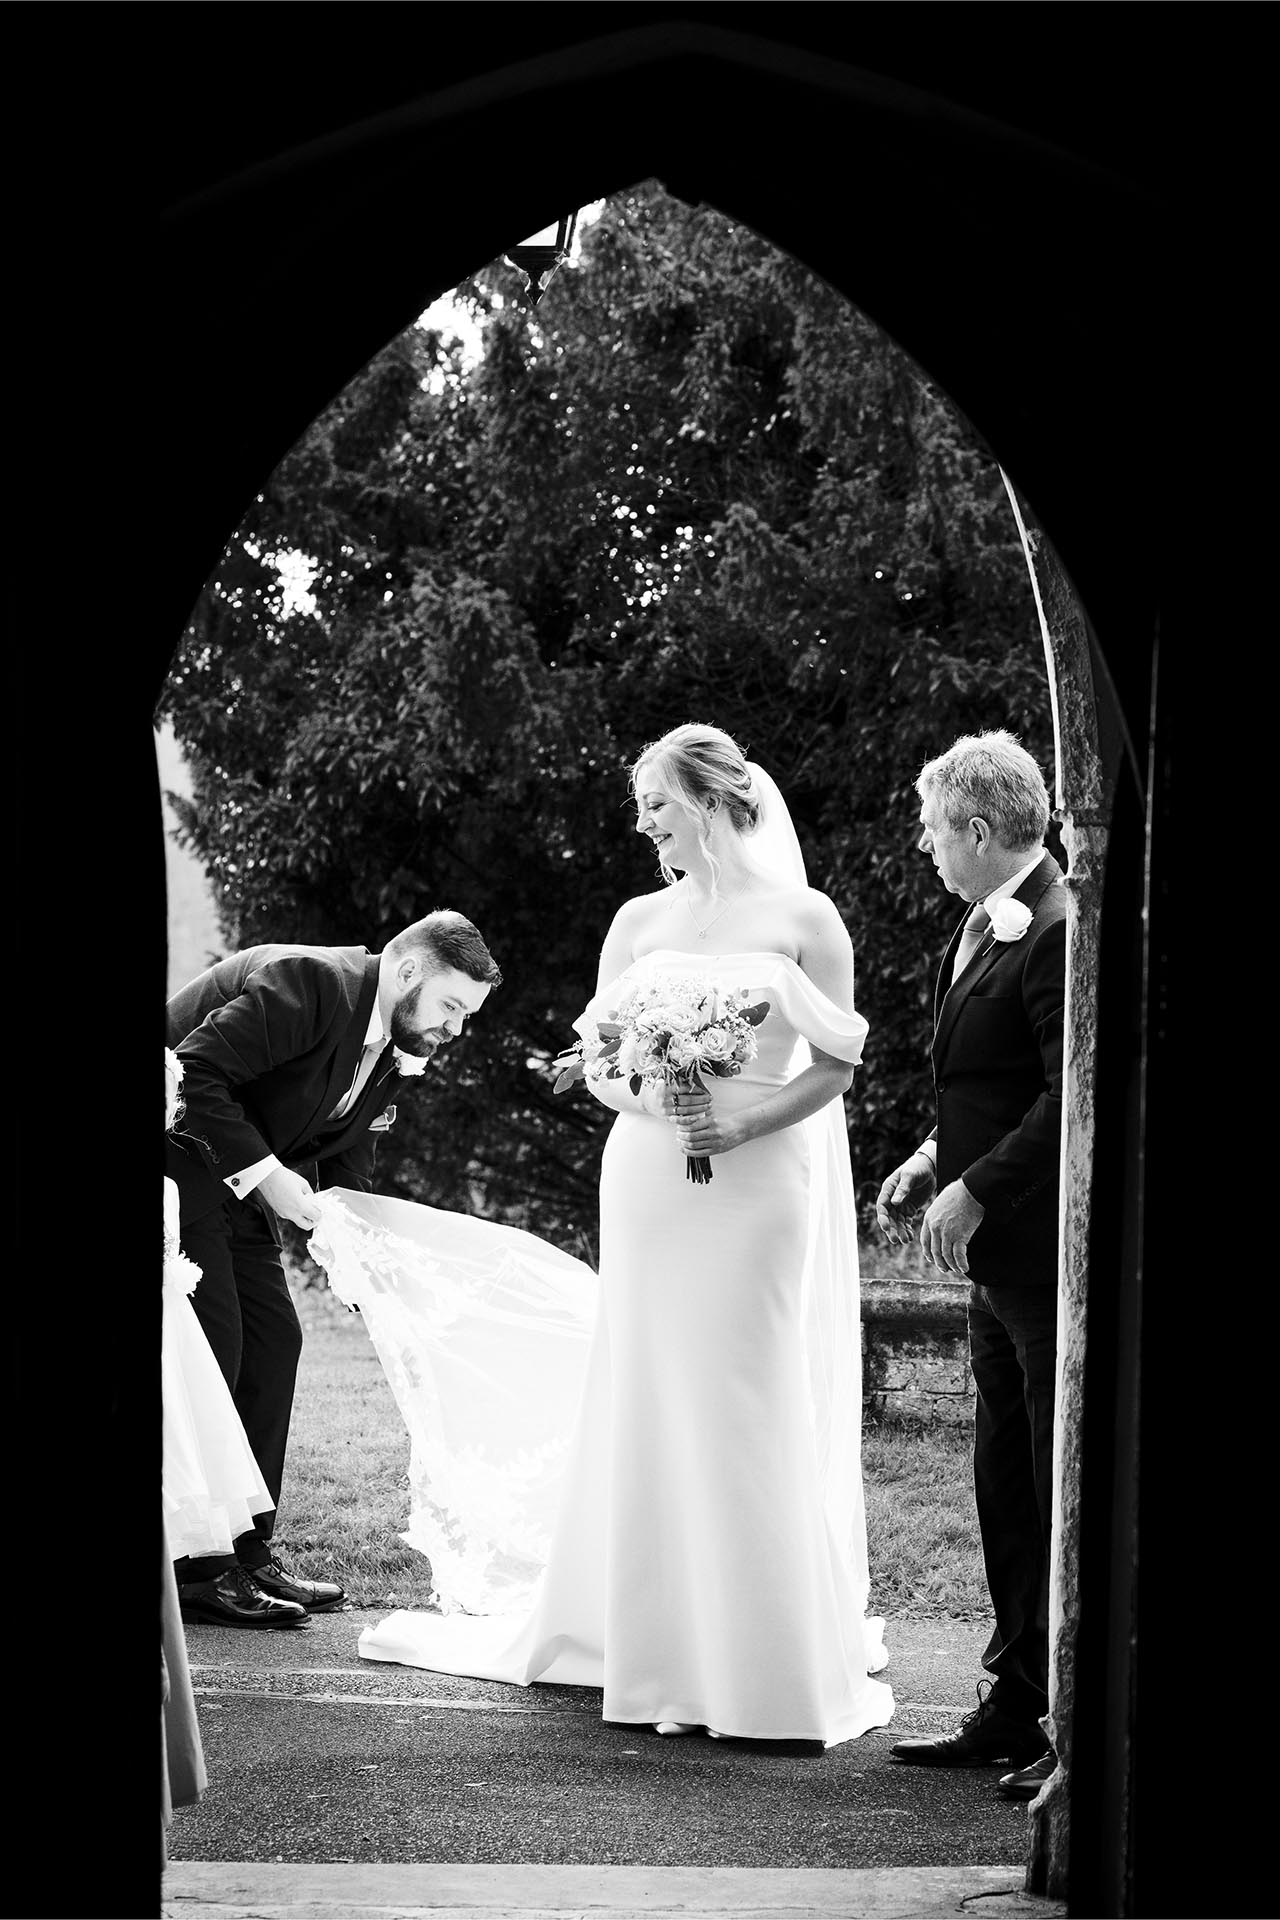 Essex reportage wedding photography at St Giles Church, Great Maplestead